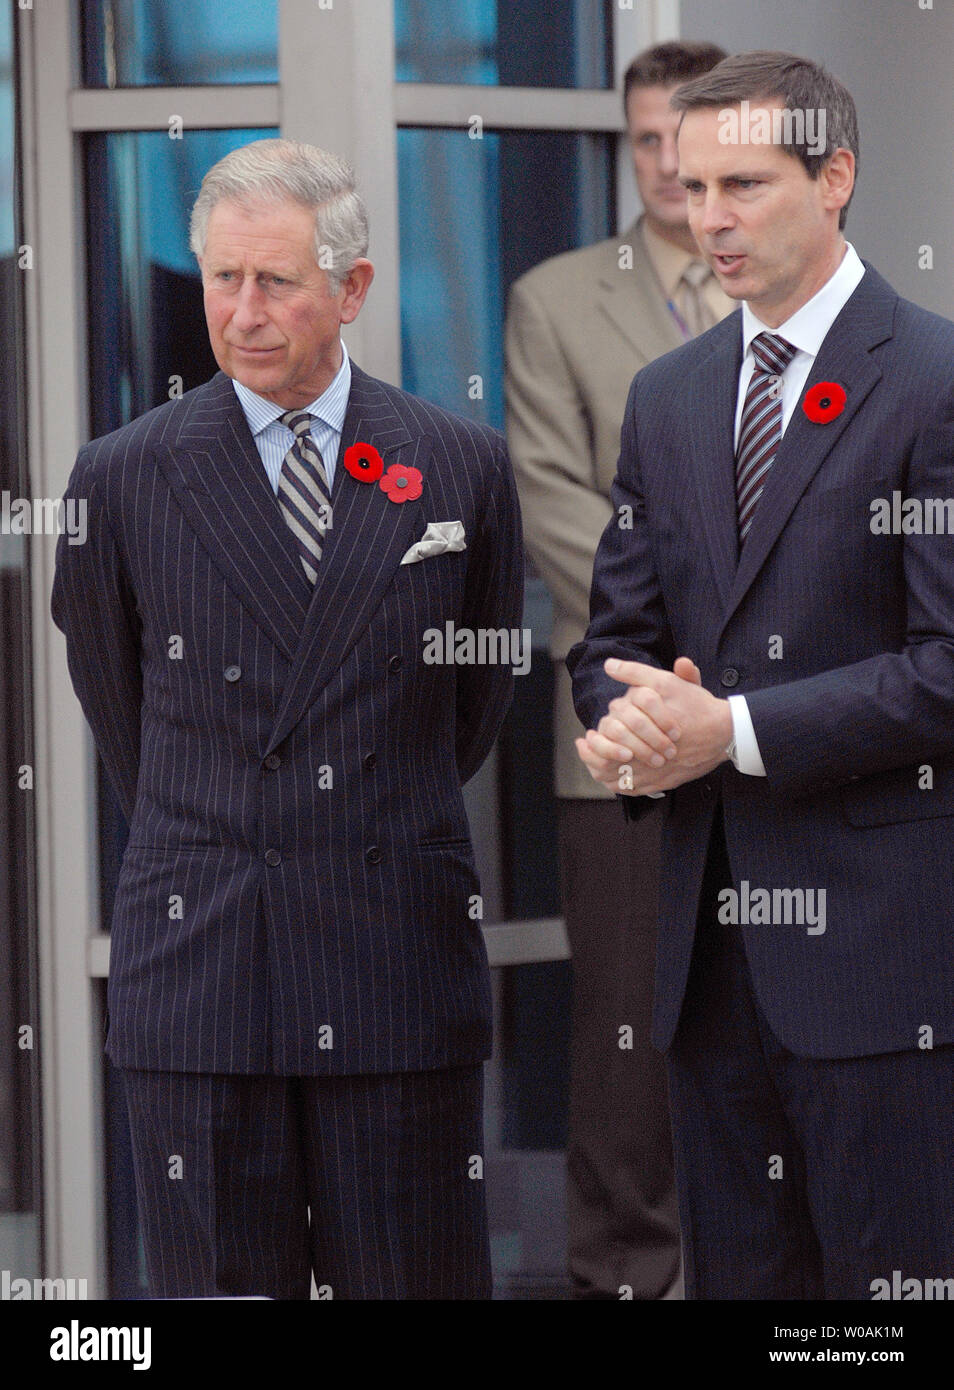 Britain's Prince Charles (R) and Ontario premier Dalton McGuinty chat as the Prince and his wife Camilla, Duchess of Cornwall, arrive at Pearson International Airport in Toronto, Canada on November 4, 2009.  The royal couple are on an 11-day tour of Canada.  UPI /Christine Chew Stock Photo